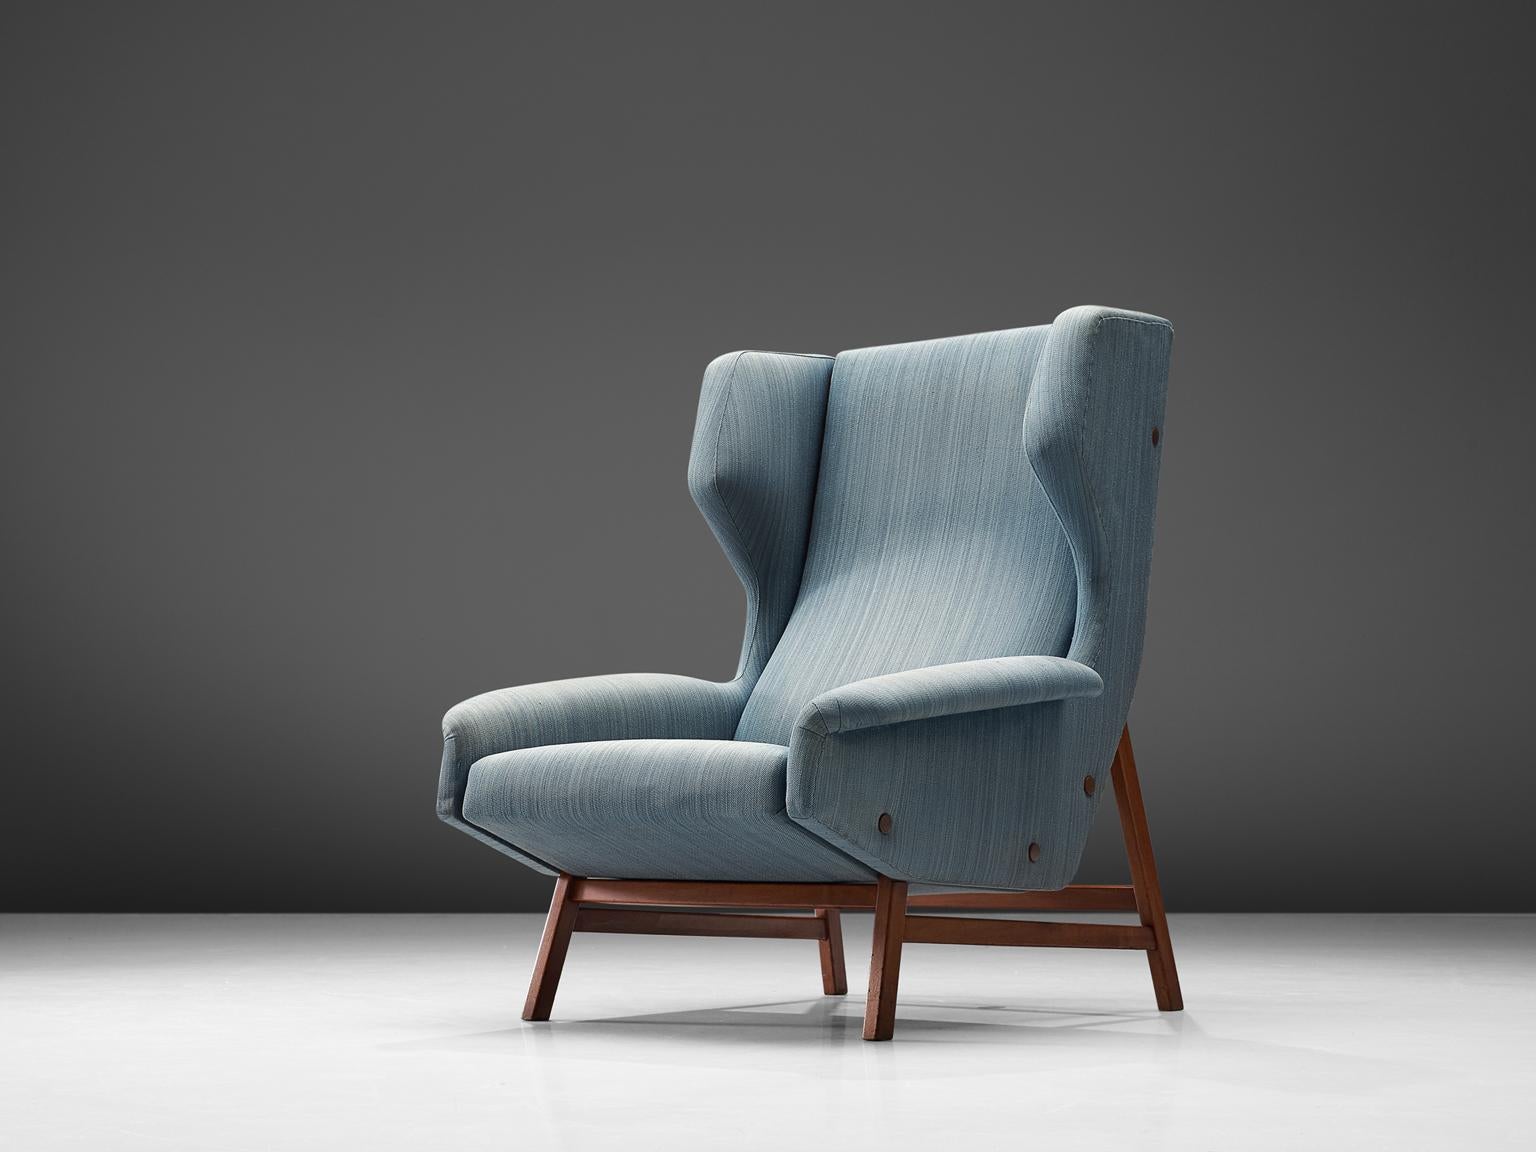 Gianfranco Frattini for Cassina, lounge chair model 877, blu fabric and teak, Italy, circa 1959.

Sturdy and voluminous lounge chair in blue original fabric. This wingback chair shows nice details and elegant lines. The buttons on the outside of